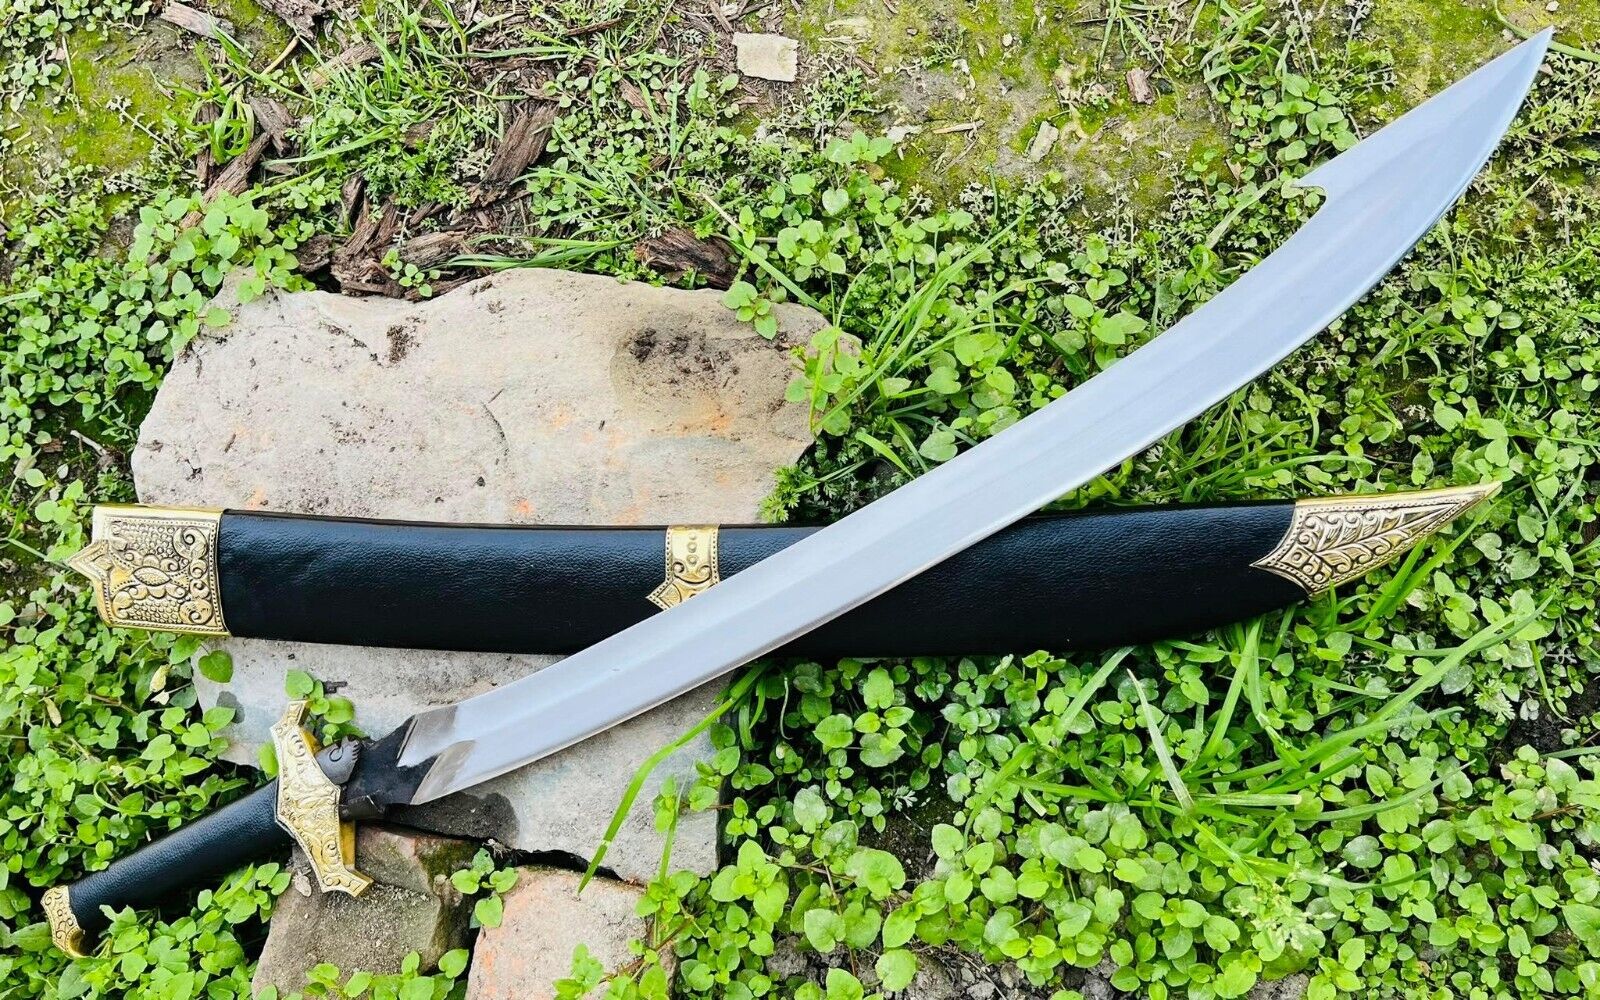 EGKH-26 Inches Royal Nepal Custom Hunting Sword-leather wrap handle -Crafted